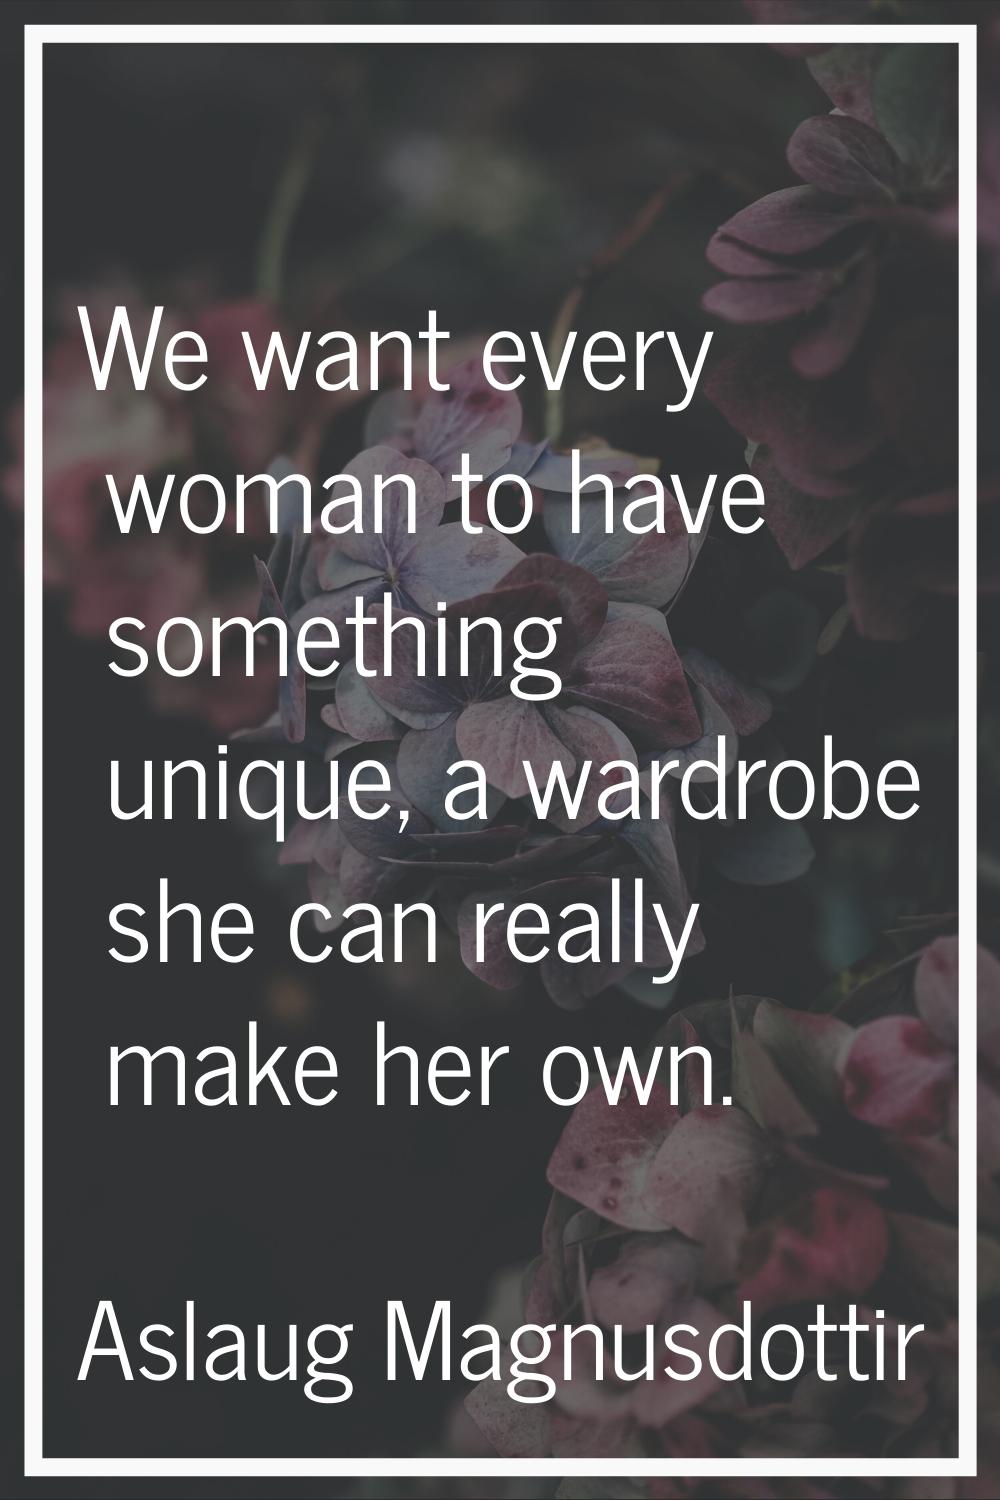 We want every woman to have something unique, a wardrobe she can really make her own.